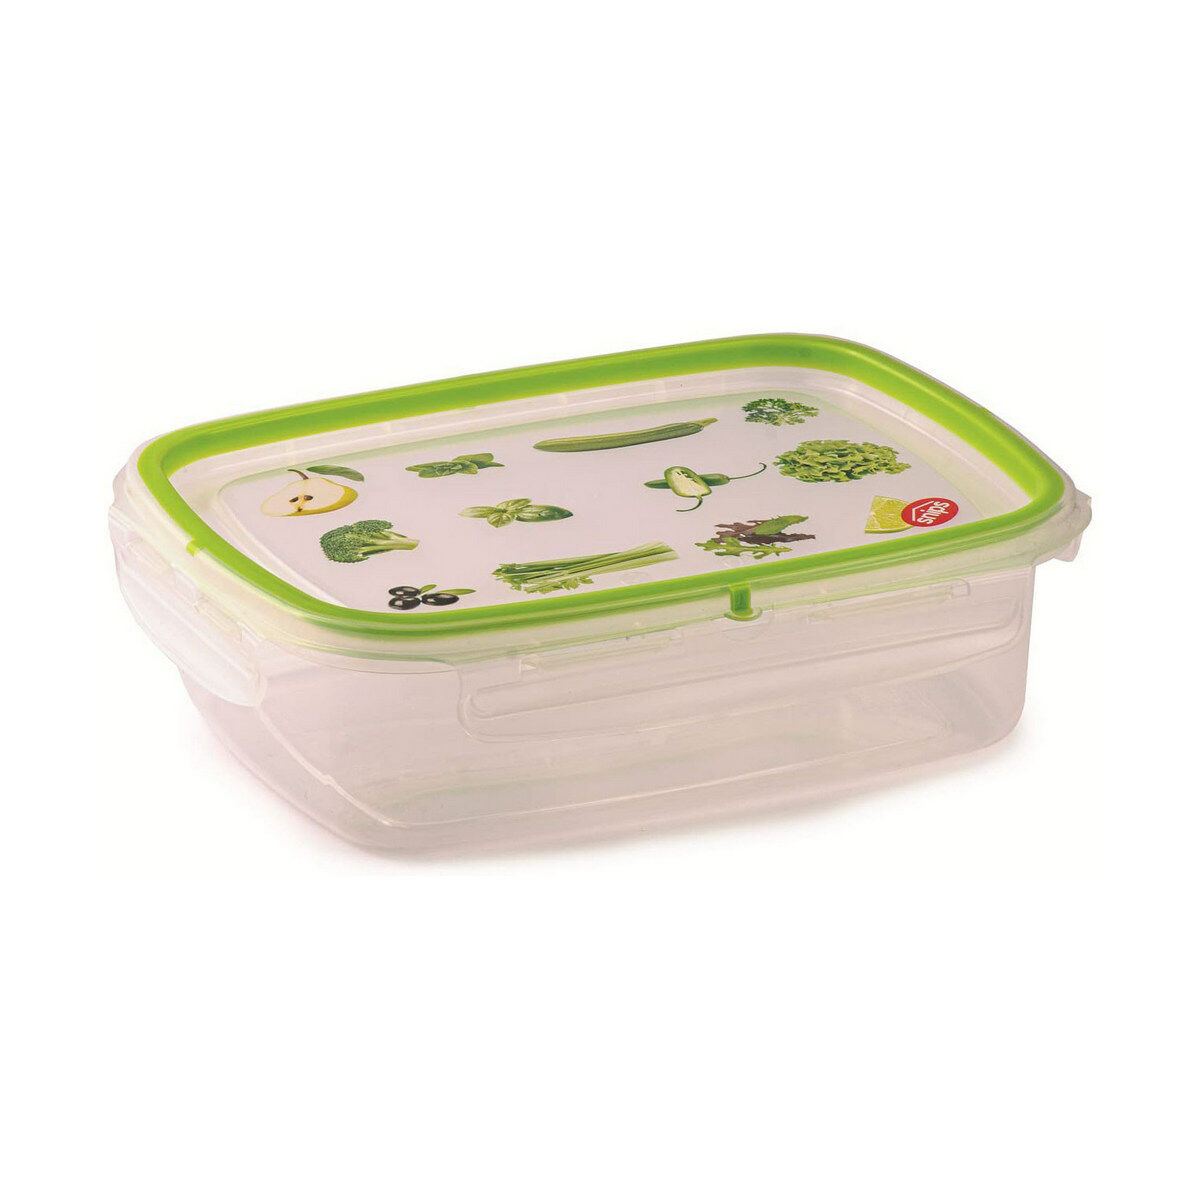 Lunch box Snips 1,4 L Hermetically sealed (2 Units)